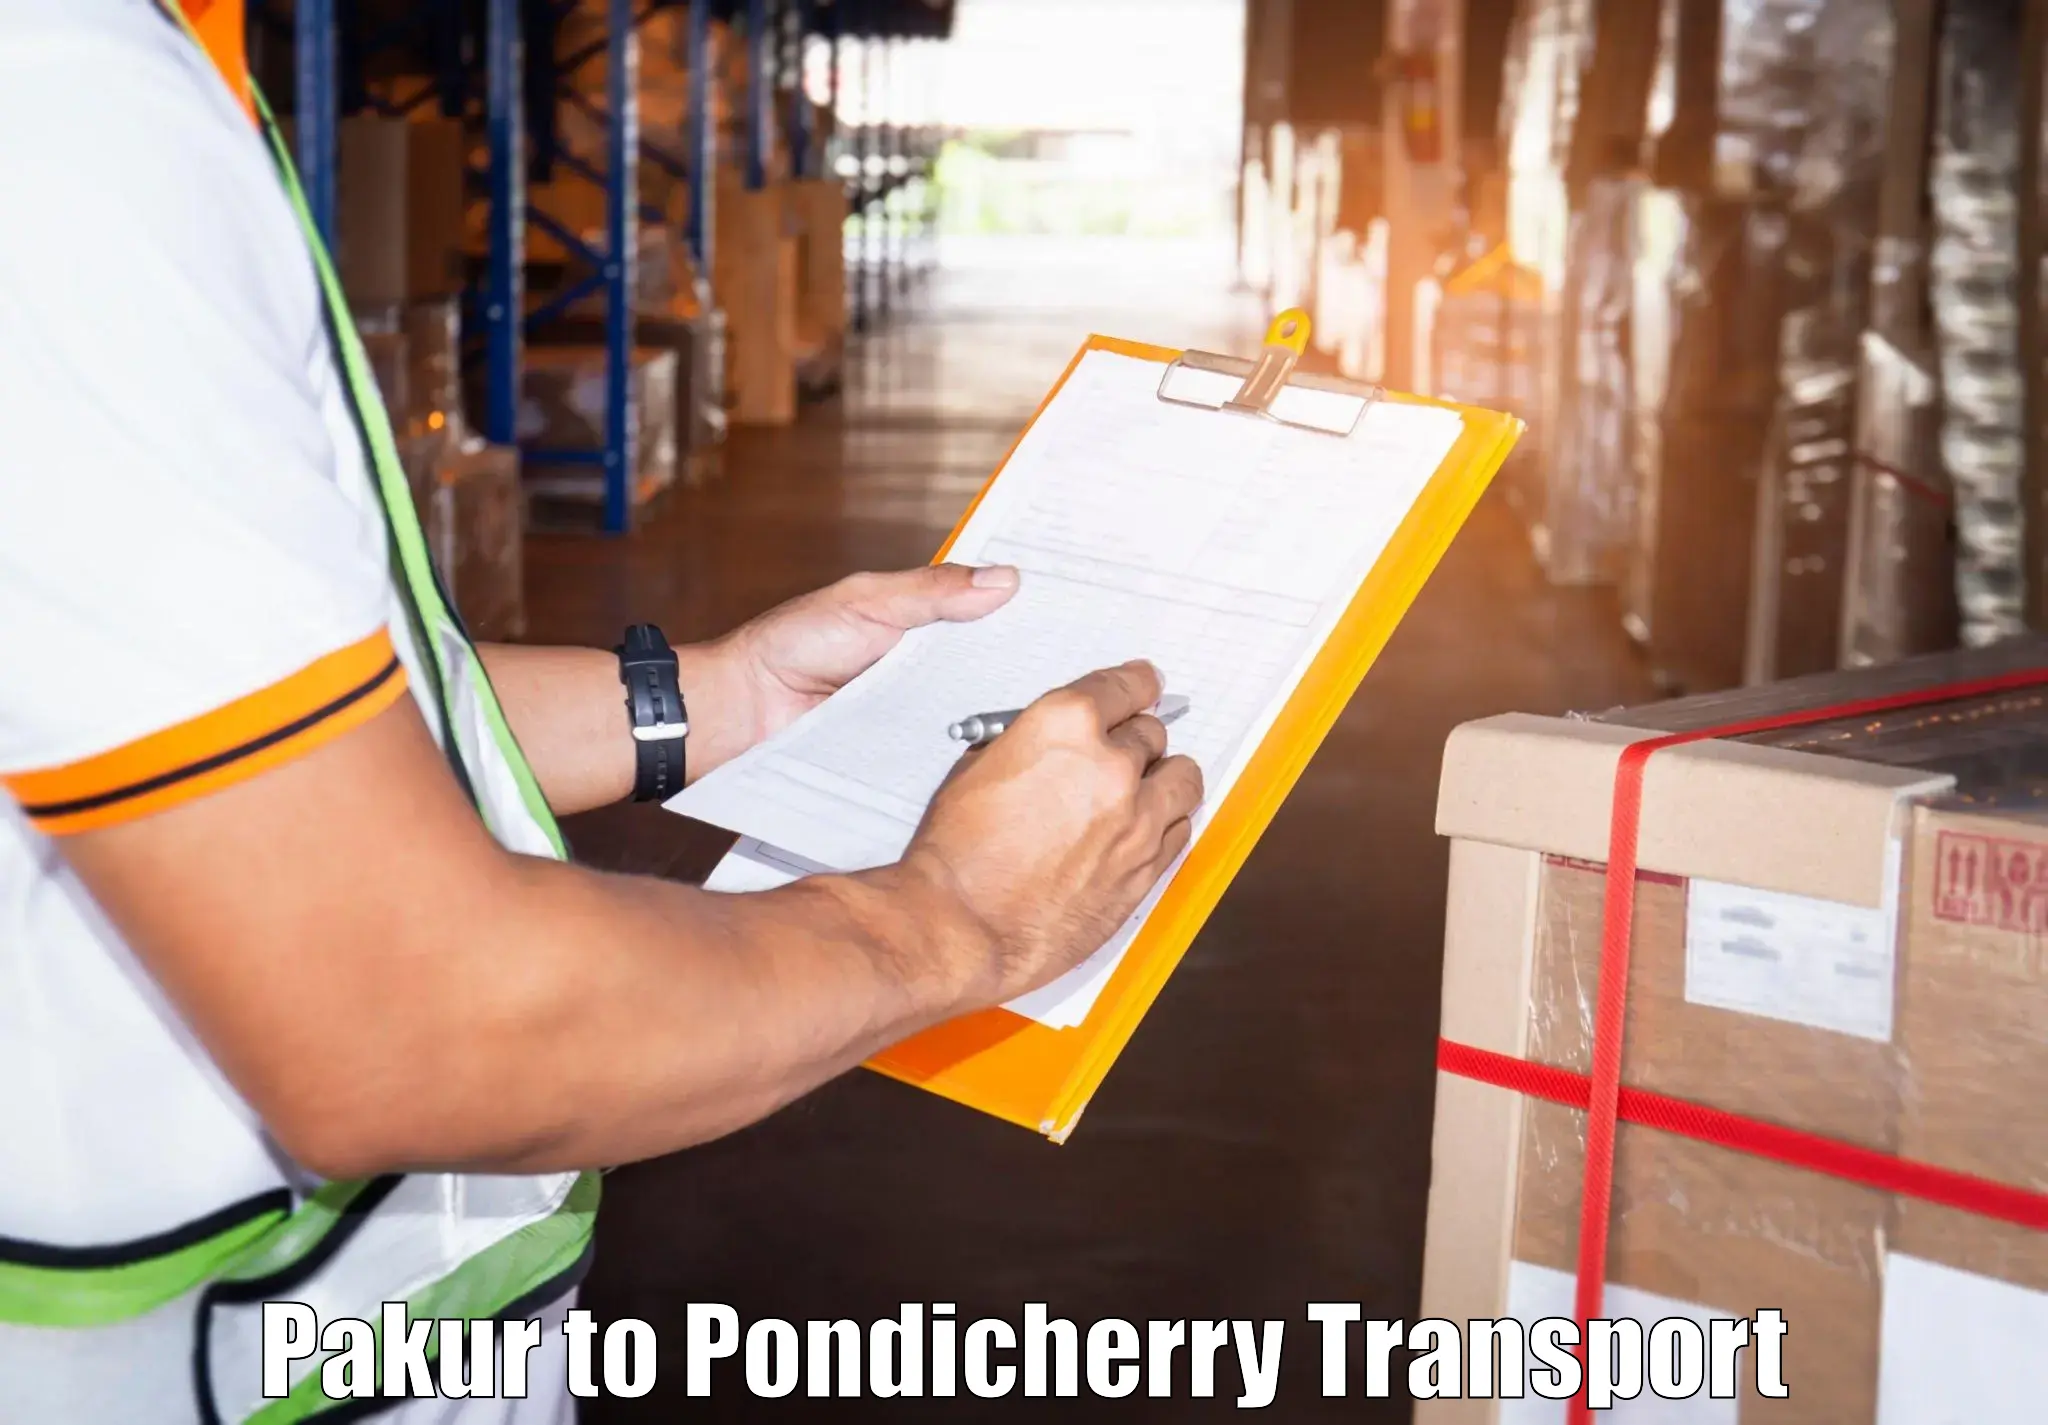 Container transport service Pakur to Pondicherry